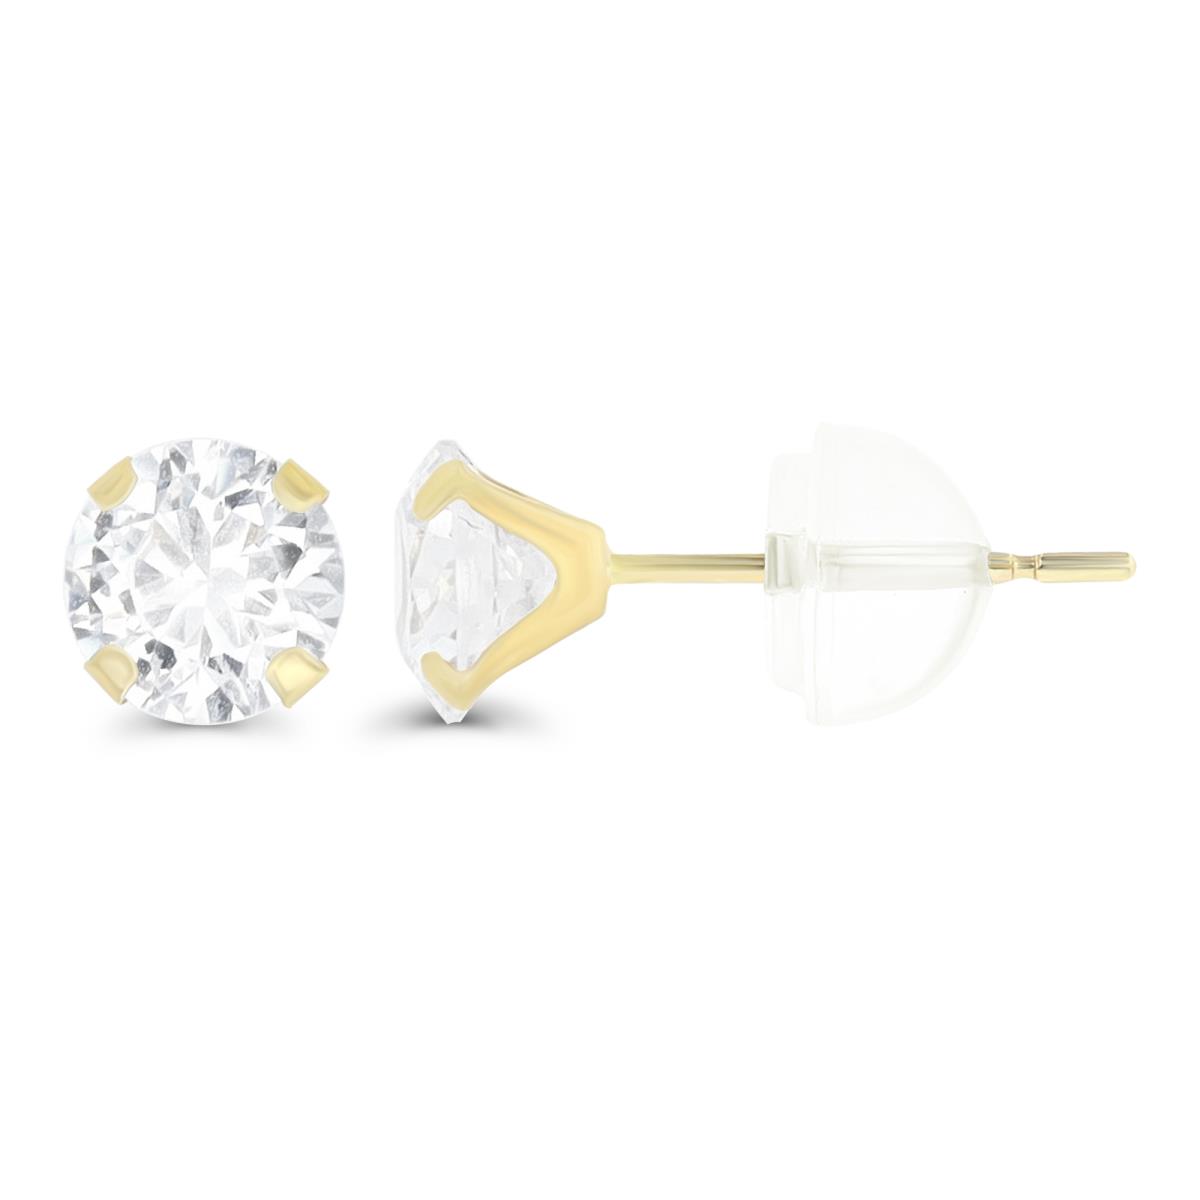 10K Yellow Gold 5mm Martini Round Cut Solitaire Stud Earring